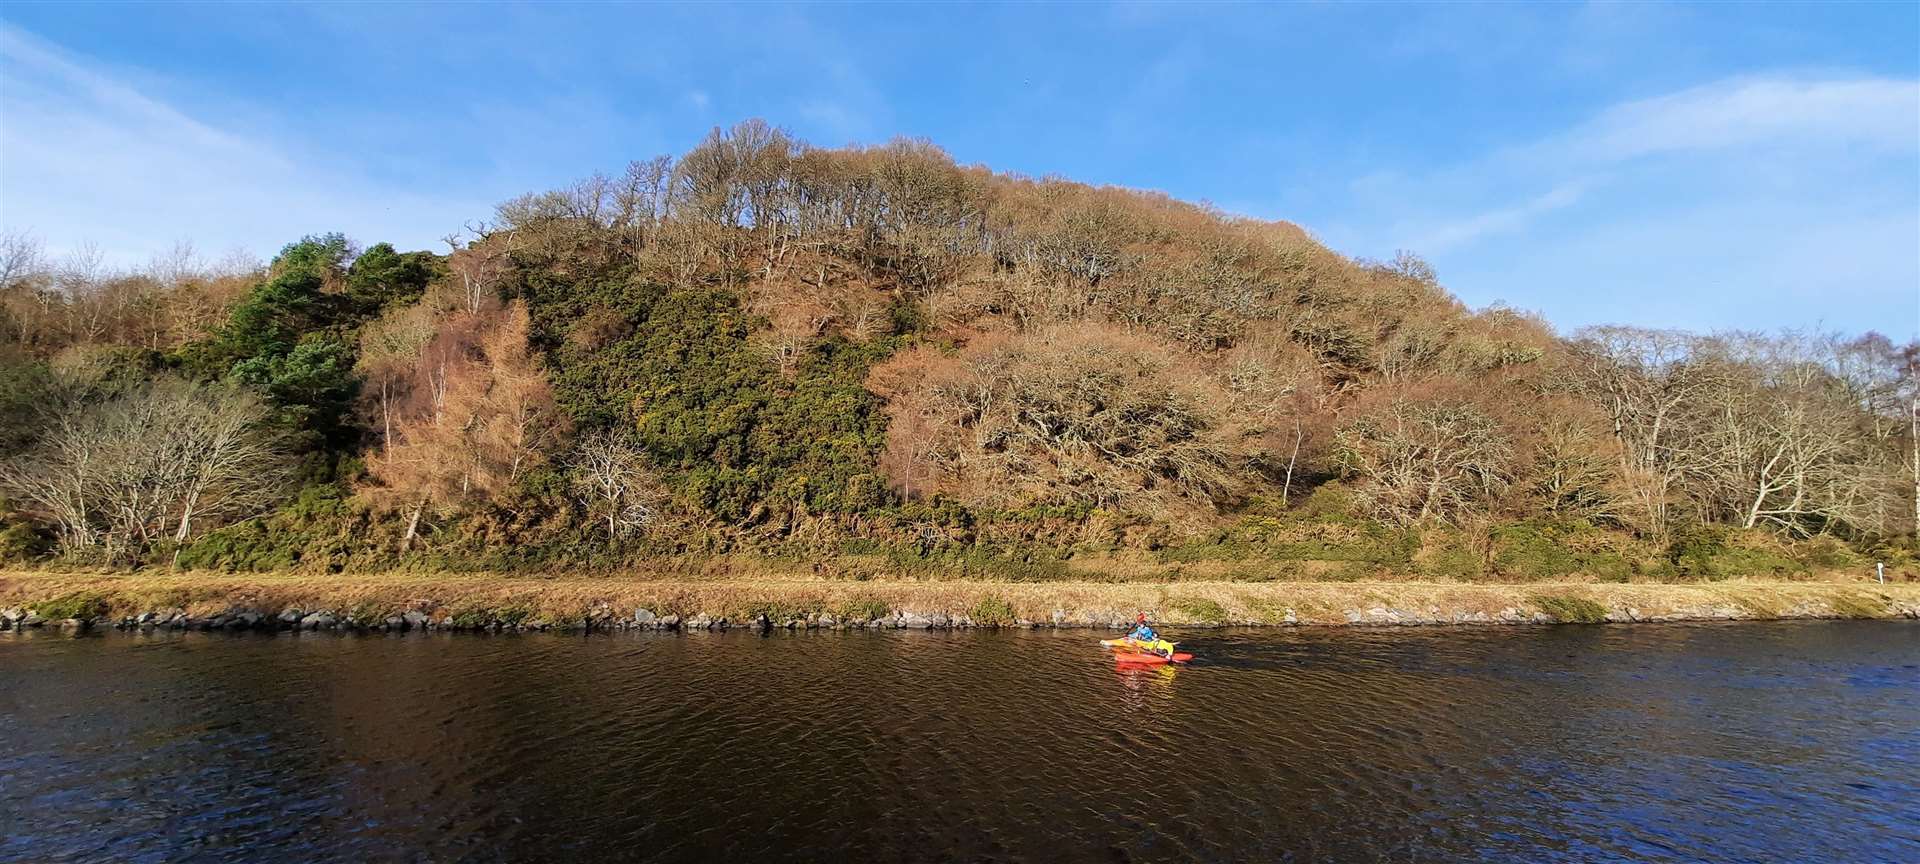 A couple of kayakers enjoy a fine morning on the Caledonian Canal in front of the former Torvean quarry.